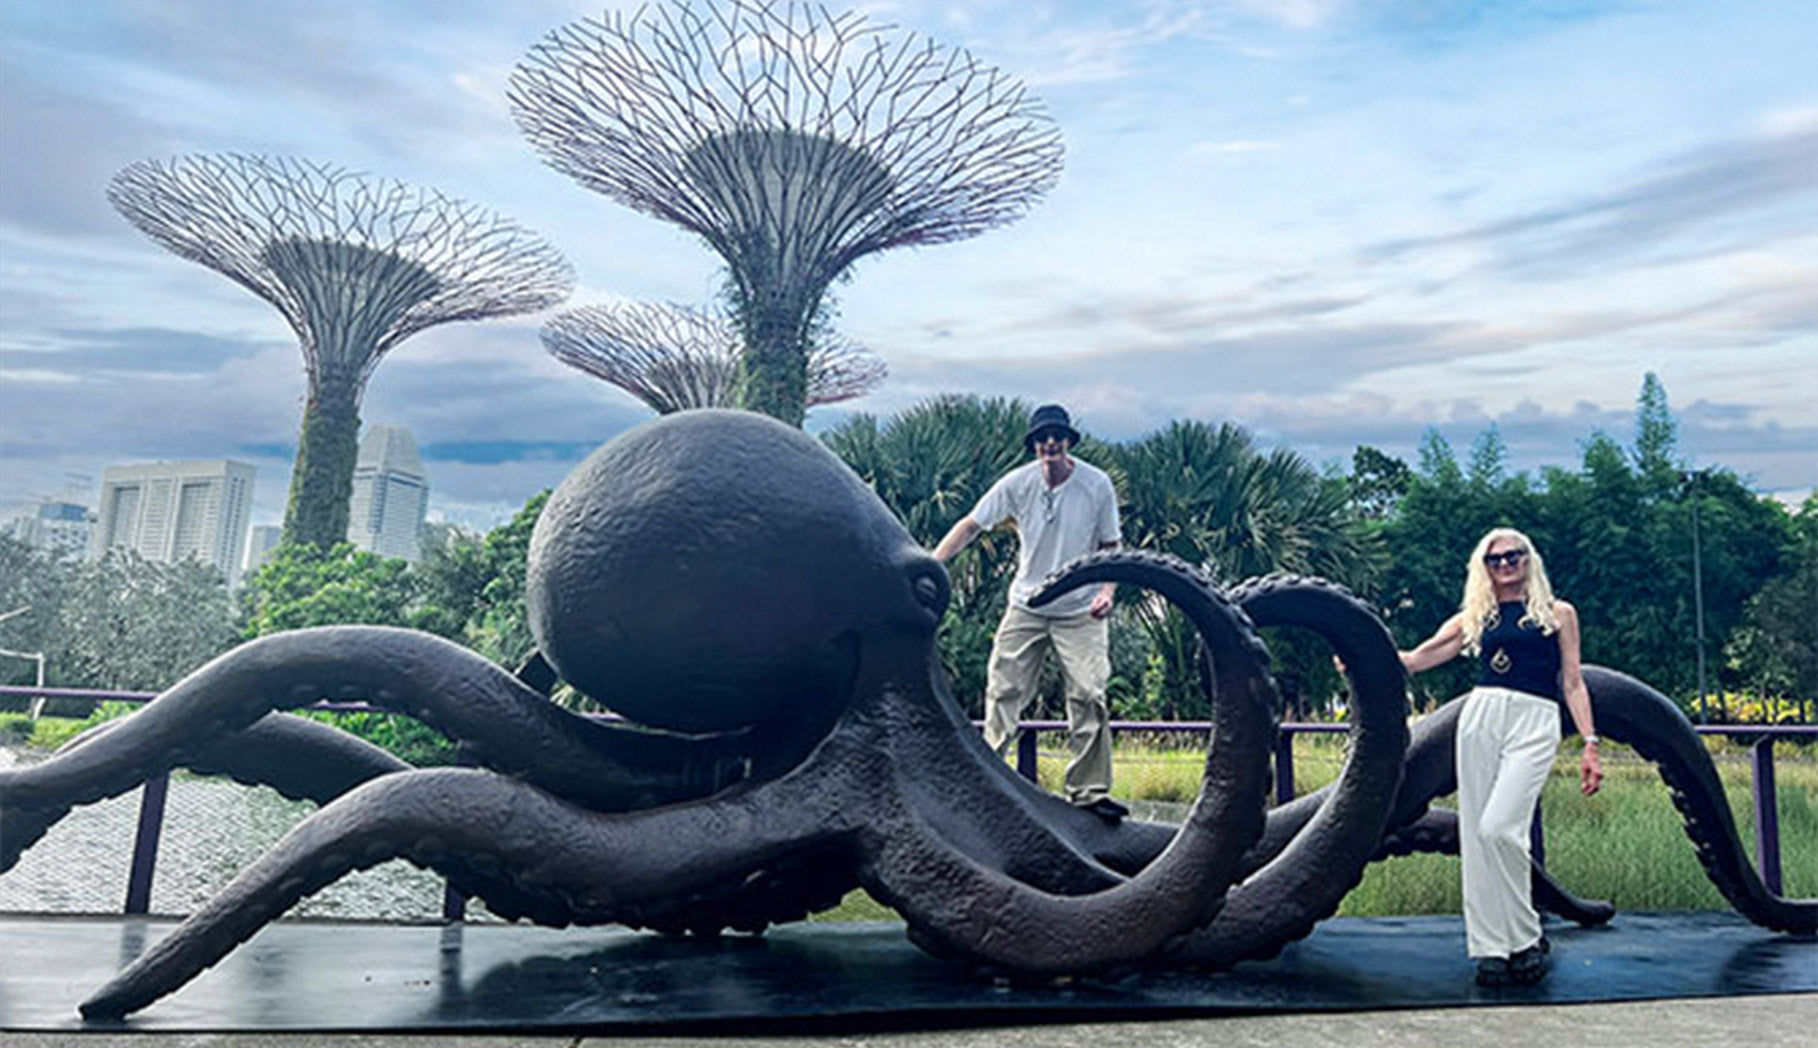 Artist duo Gillie and Marc stood next to giant life size bronze sculpture of Octopus in Singapore